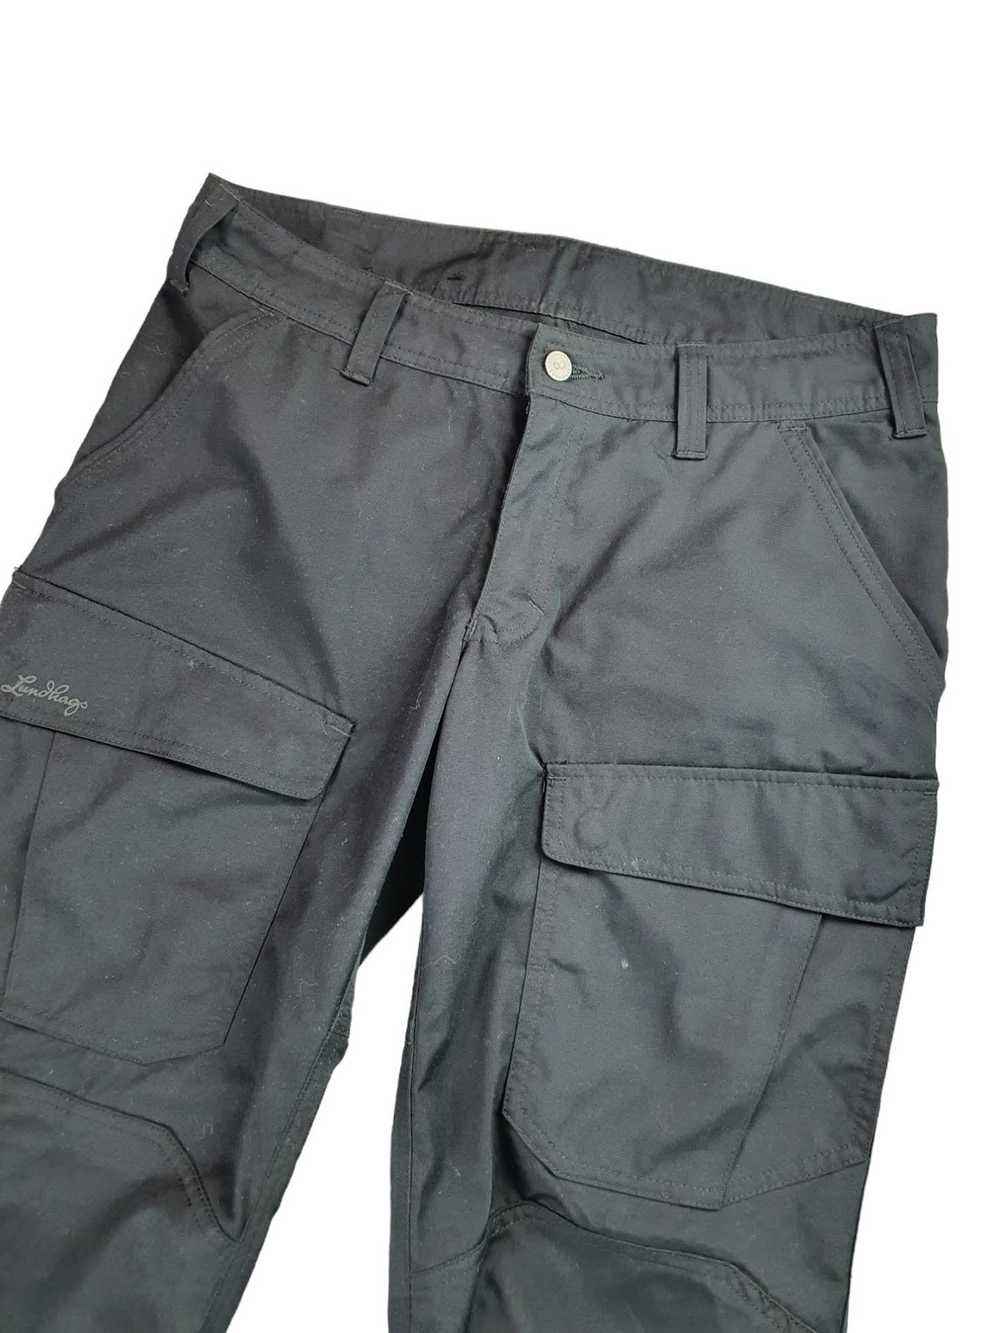 Outdoor Life Lundhags Field Women's Pant Black Tr… - image 3